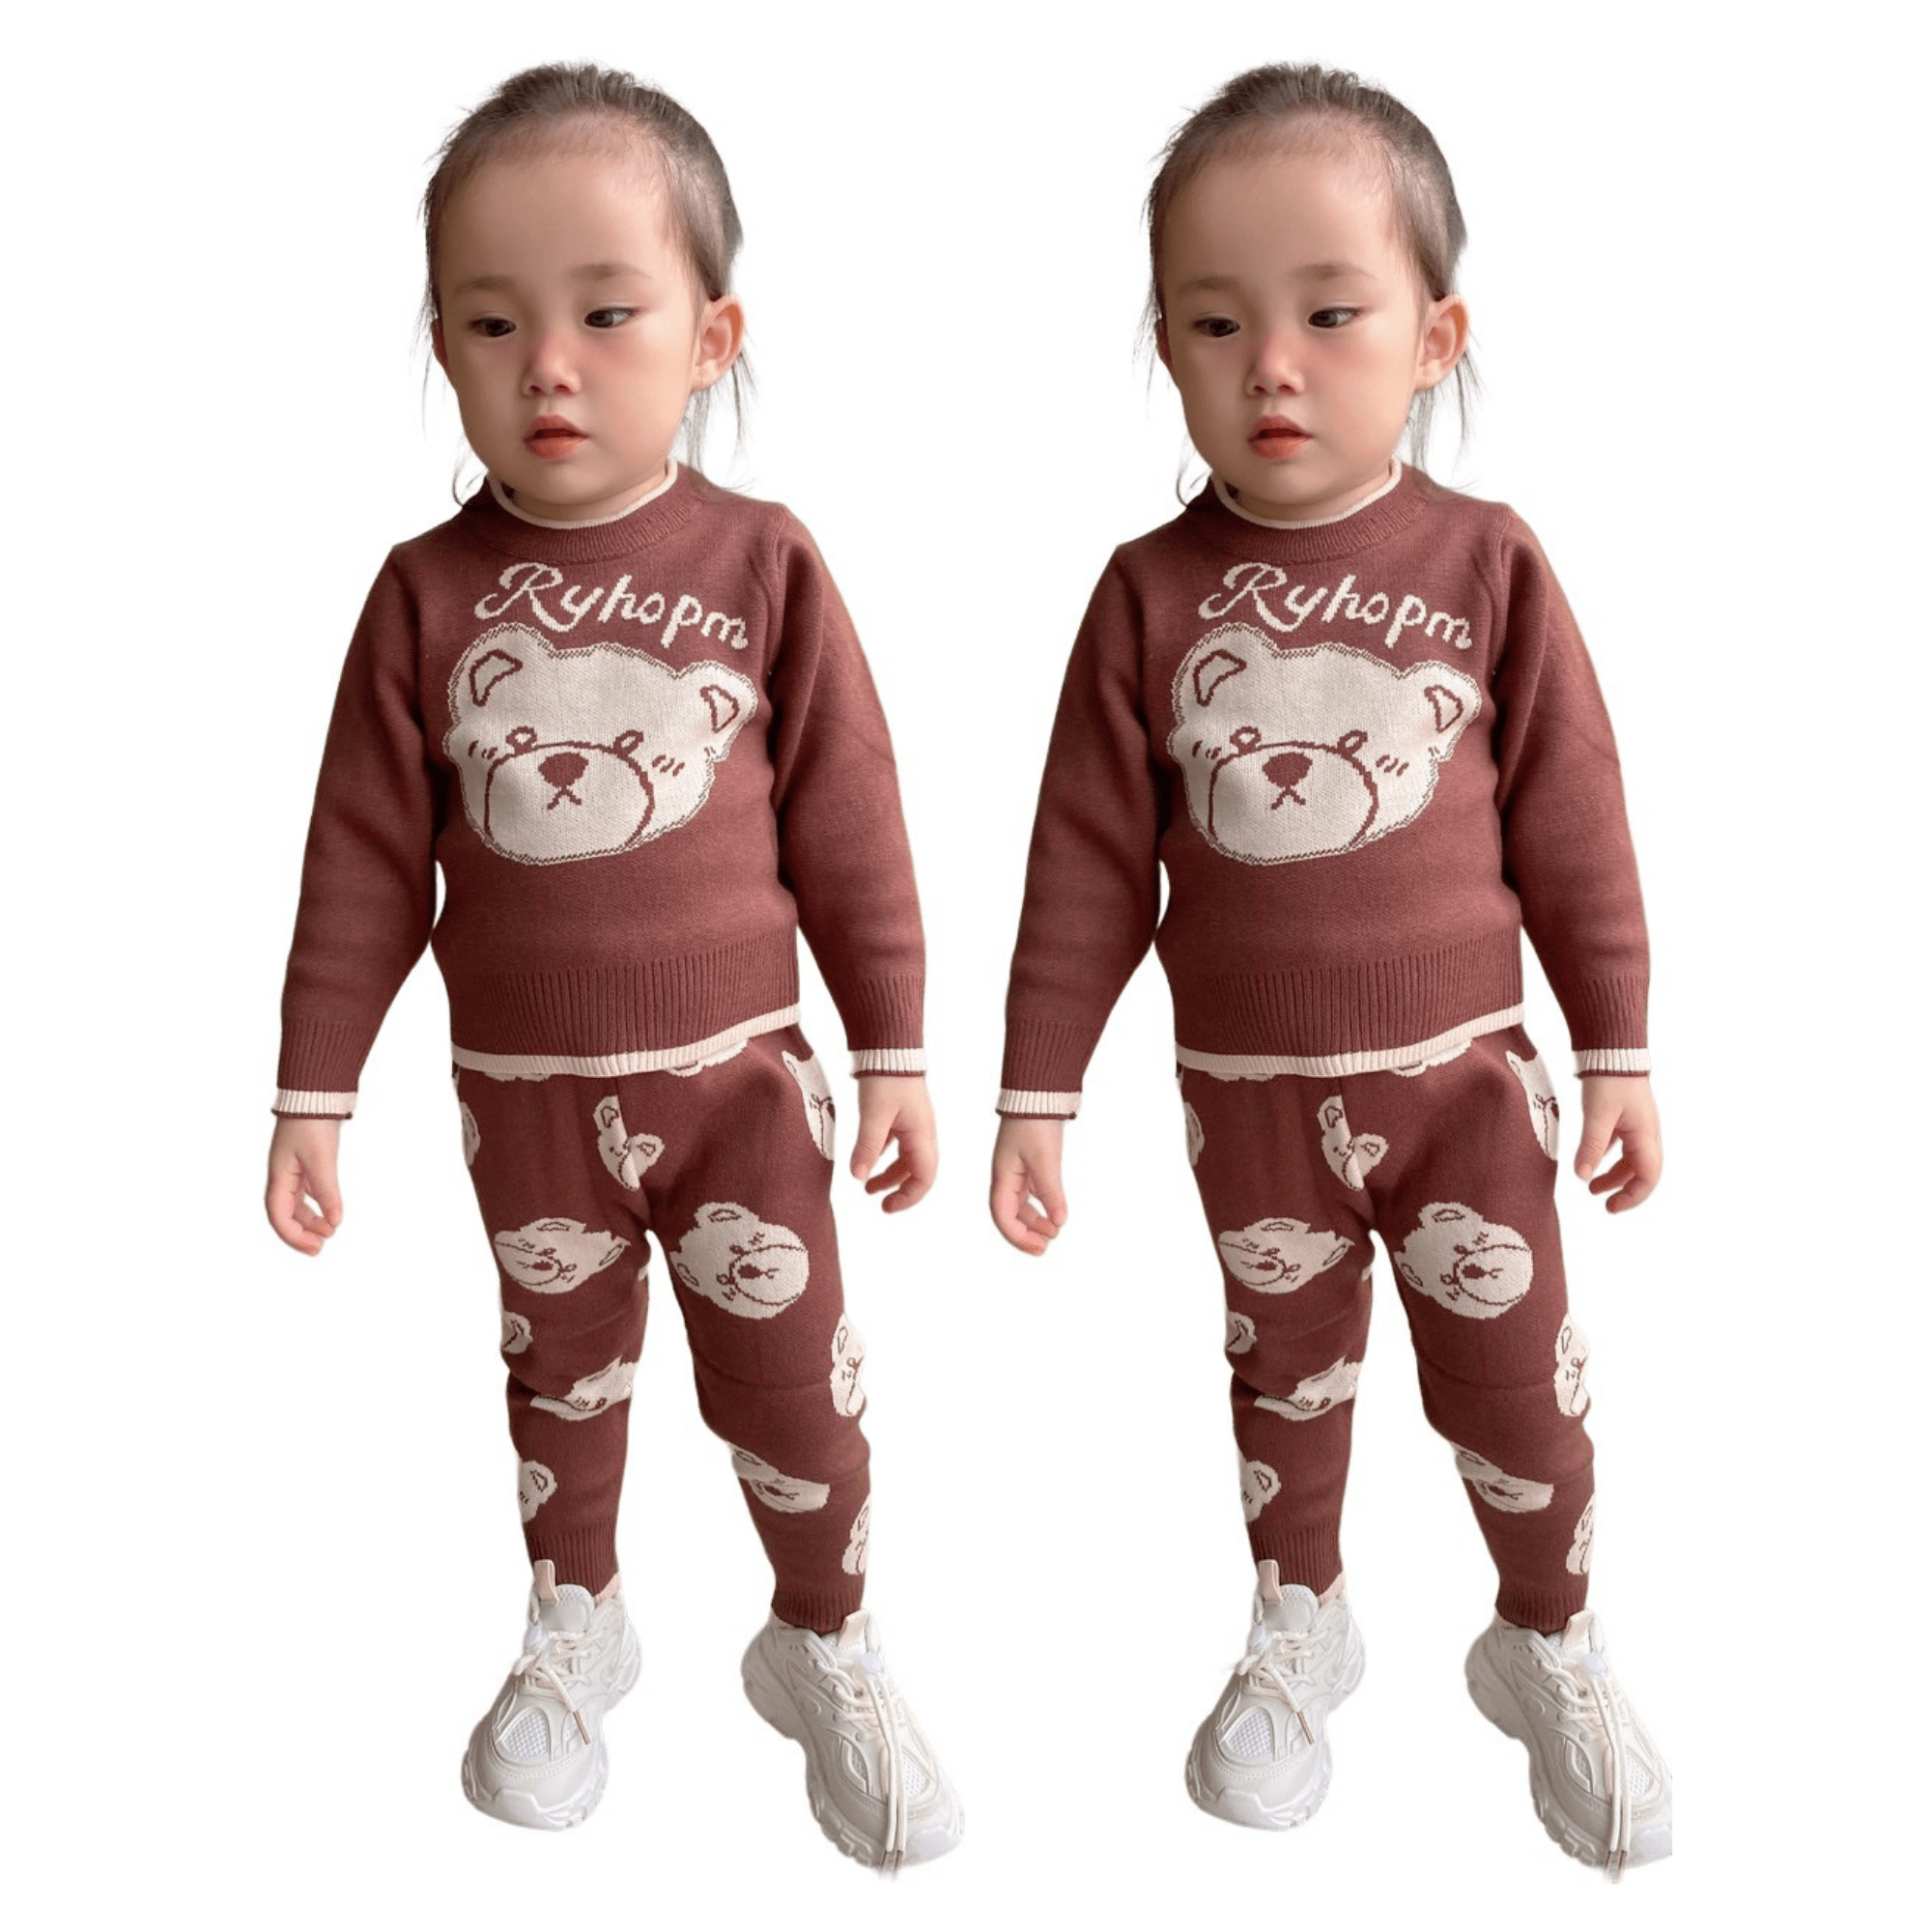 Kids Designers Clothes Fast Delivery Natural Woolen Set New Arrival Each One In Opp Bag From Vietnam Manufacturer